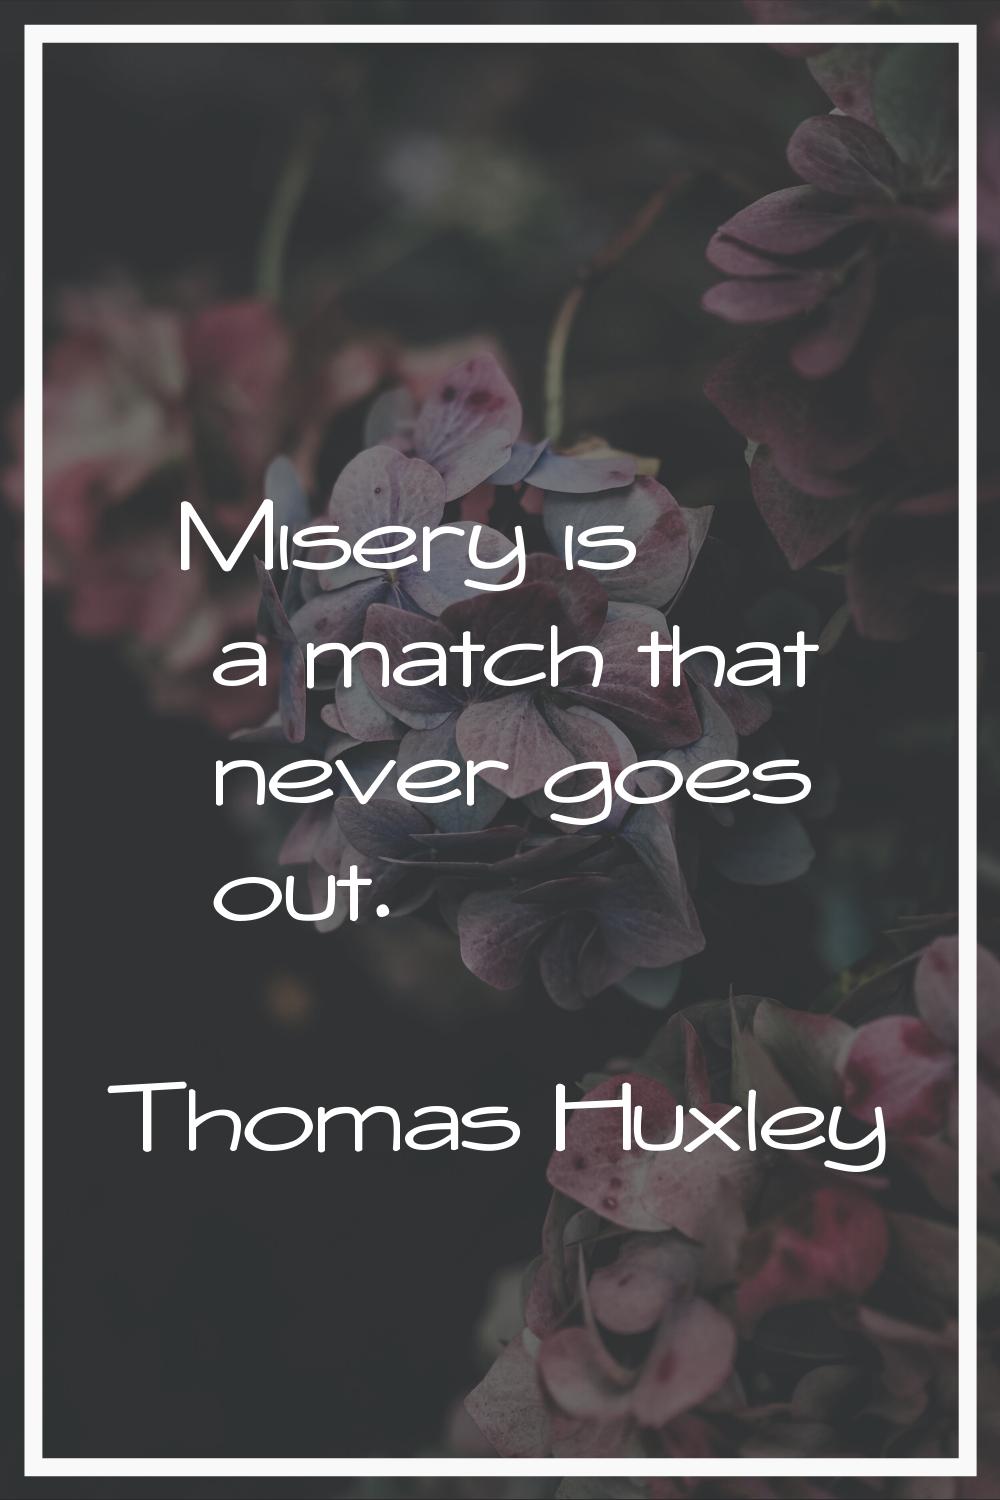 Misery is a match that never goes out.